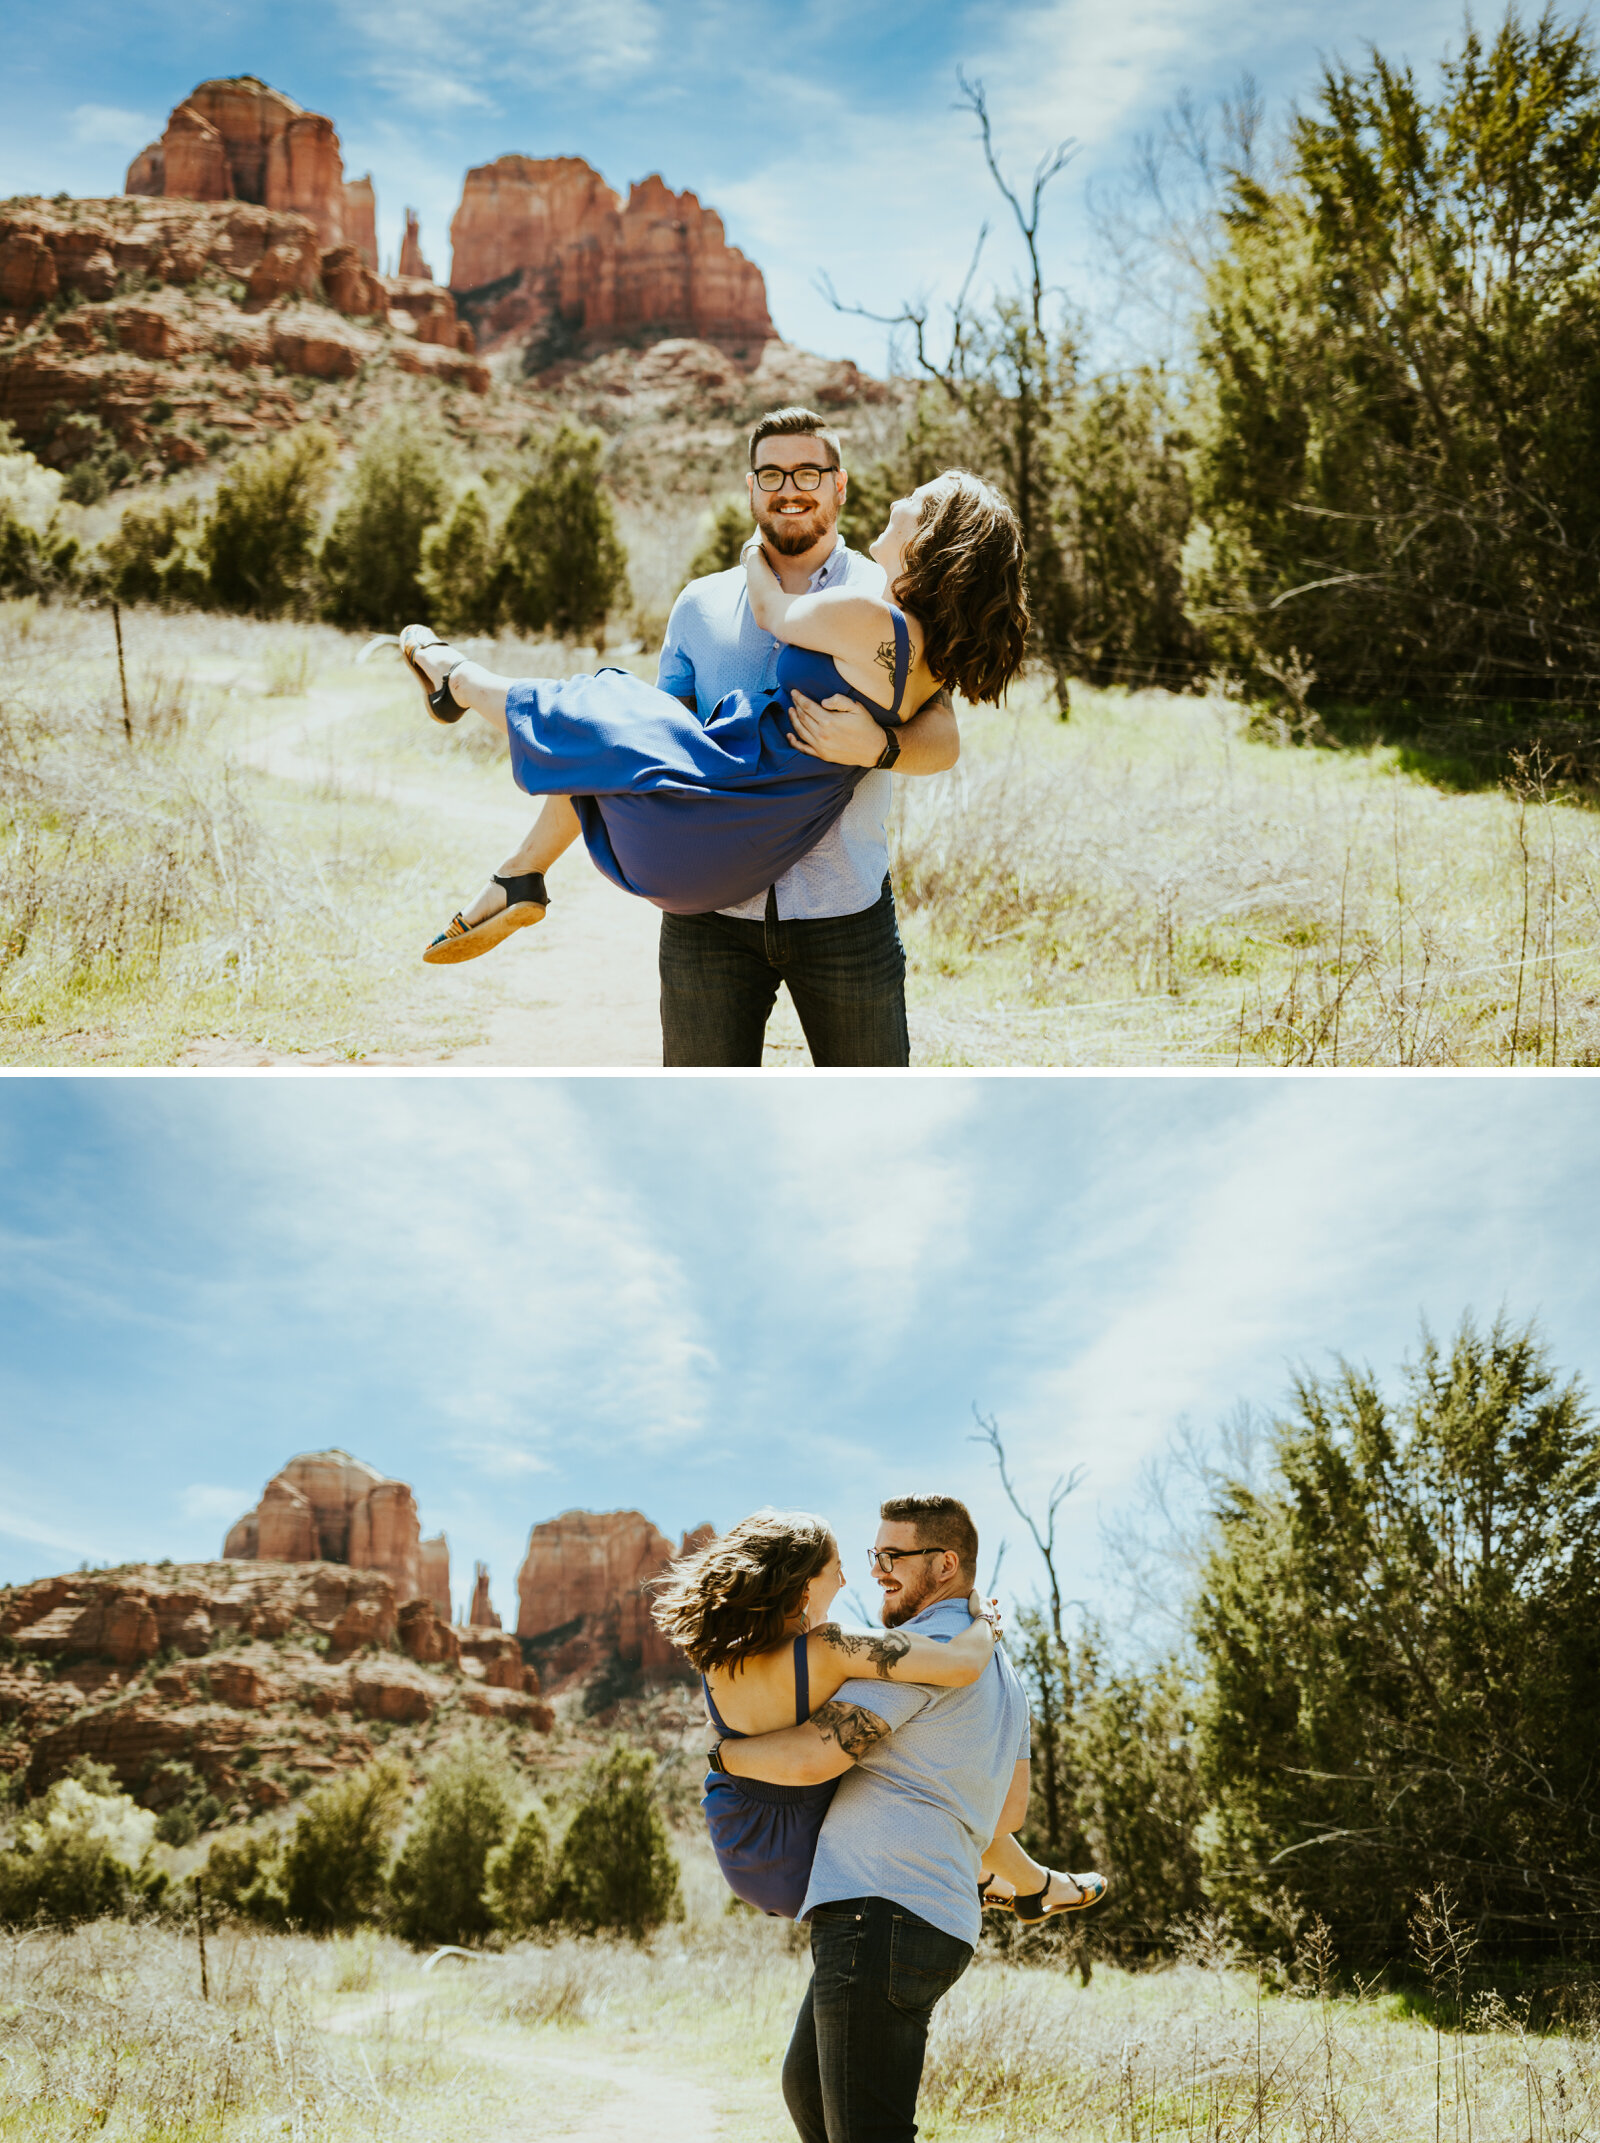 red rock crossing sedona arizona cathedral rock crescent moon ranch couple photos engagement photo outfit inspiration couple posing ideas midday picture-4.jpg